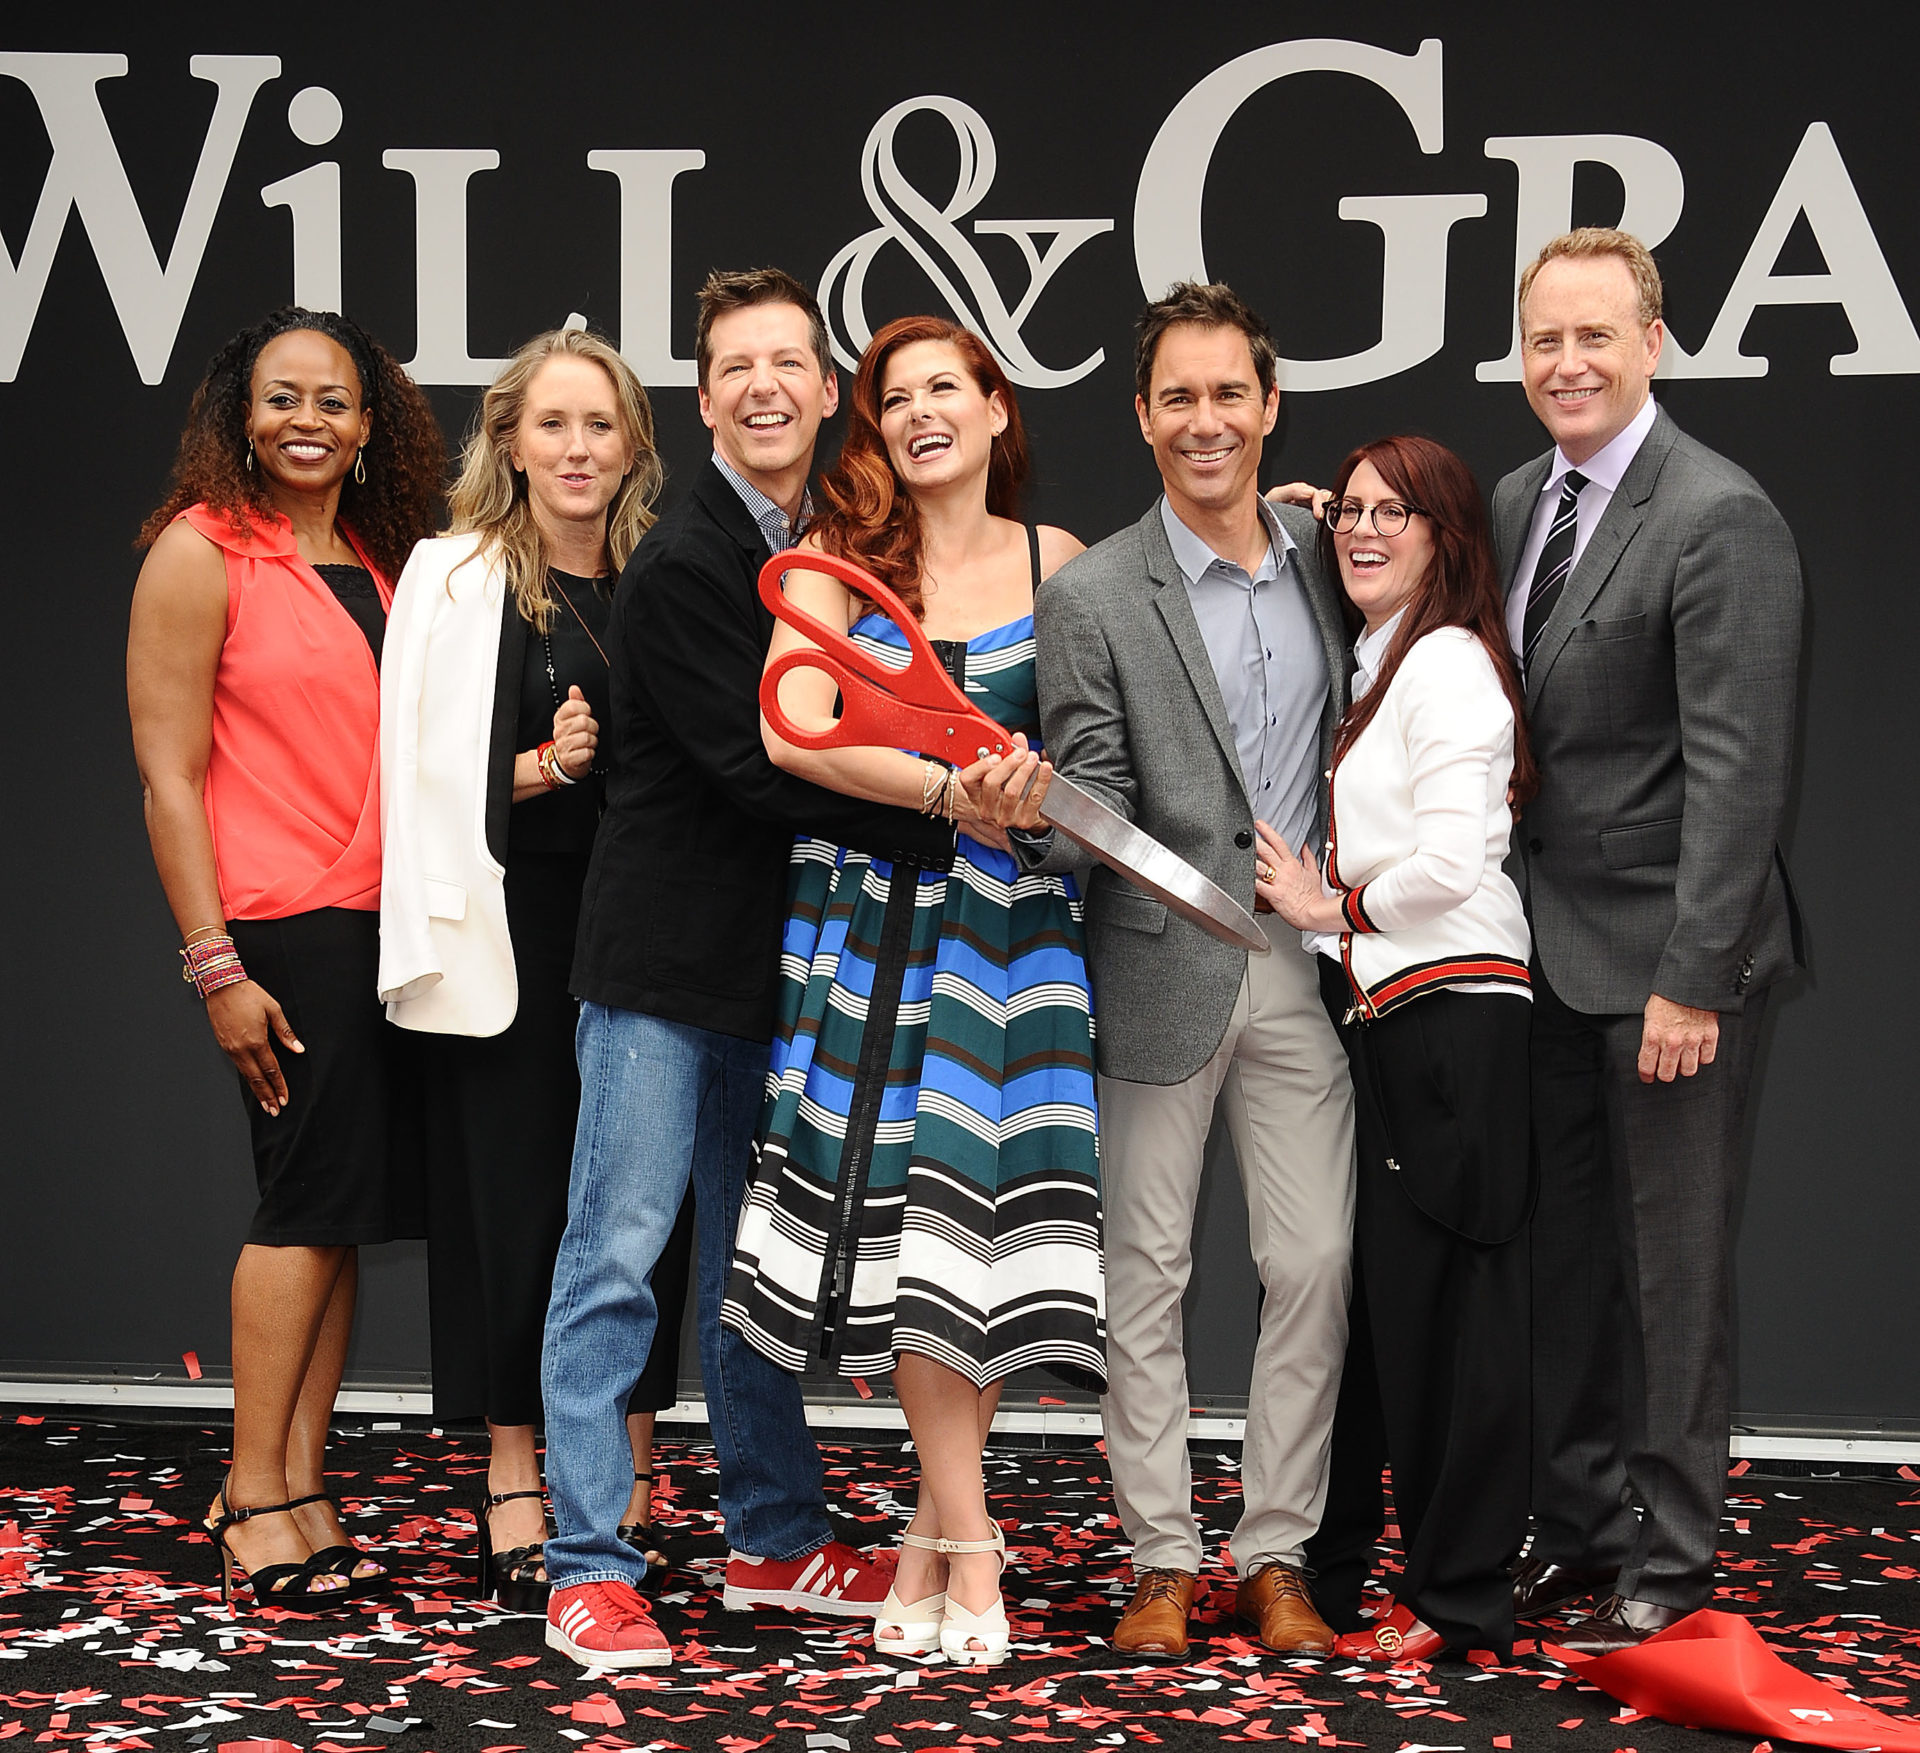 "Will & Grace" Start Of Production Kick Off Event And Ribbon Cutting Ceremony